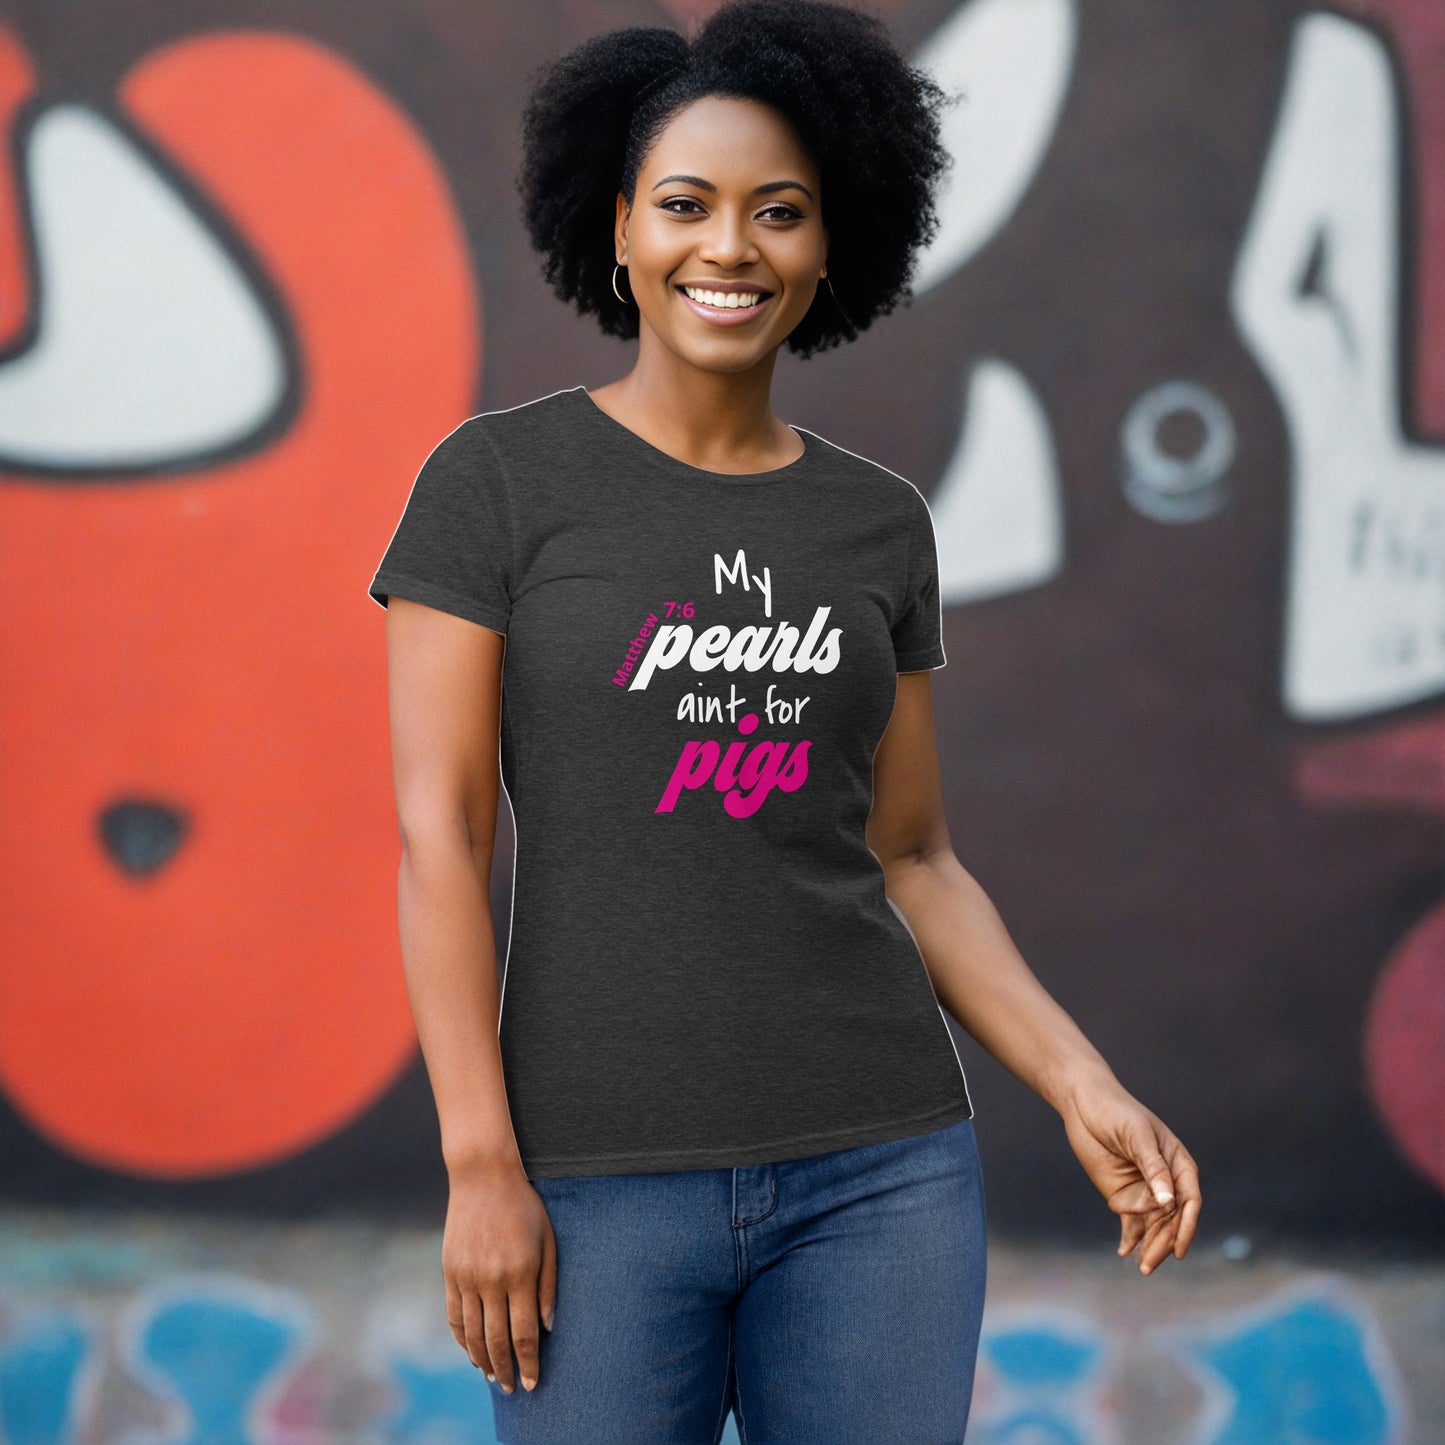 Women's My Pearl's Aint for Pigs short sleeve t-shirt